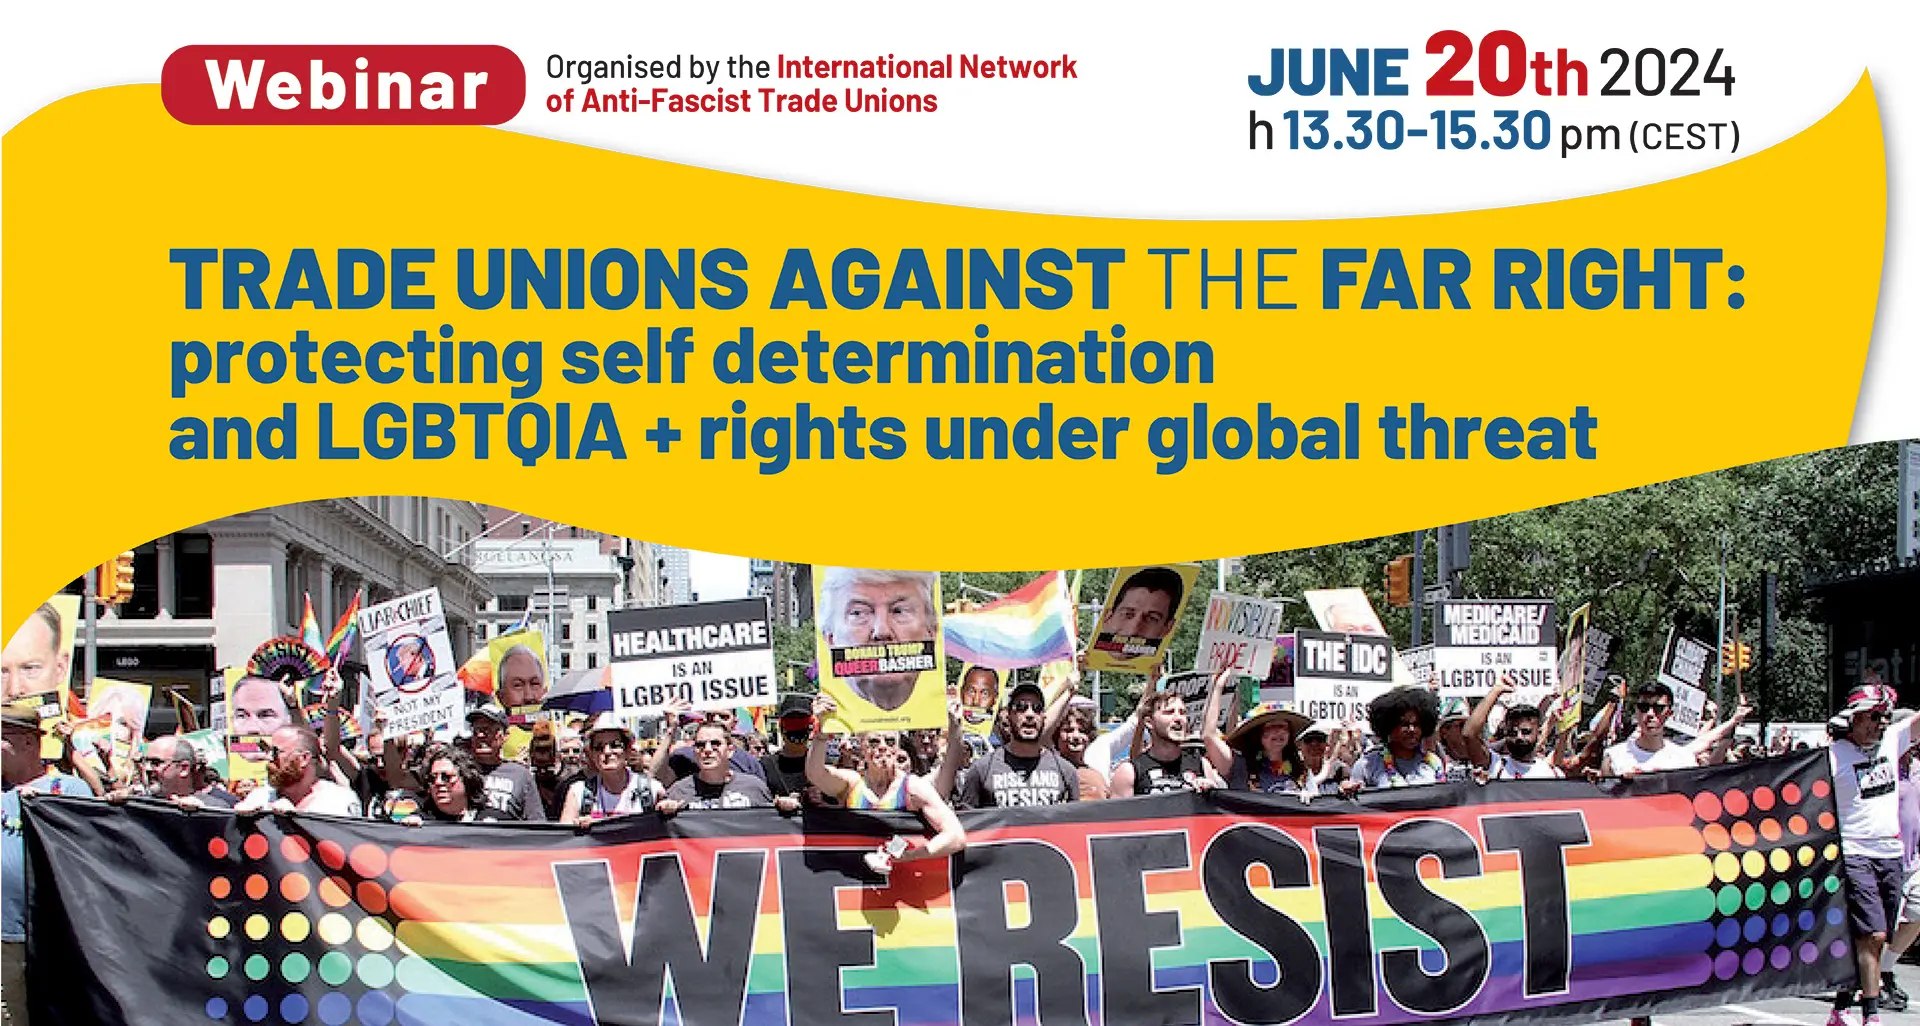 Trade Unions against the far right